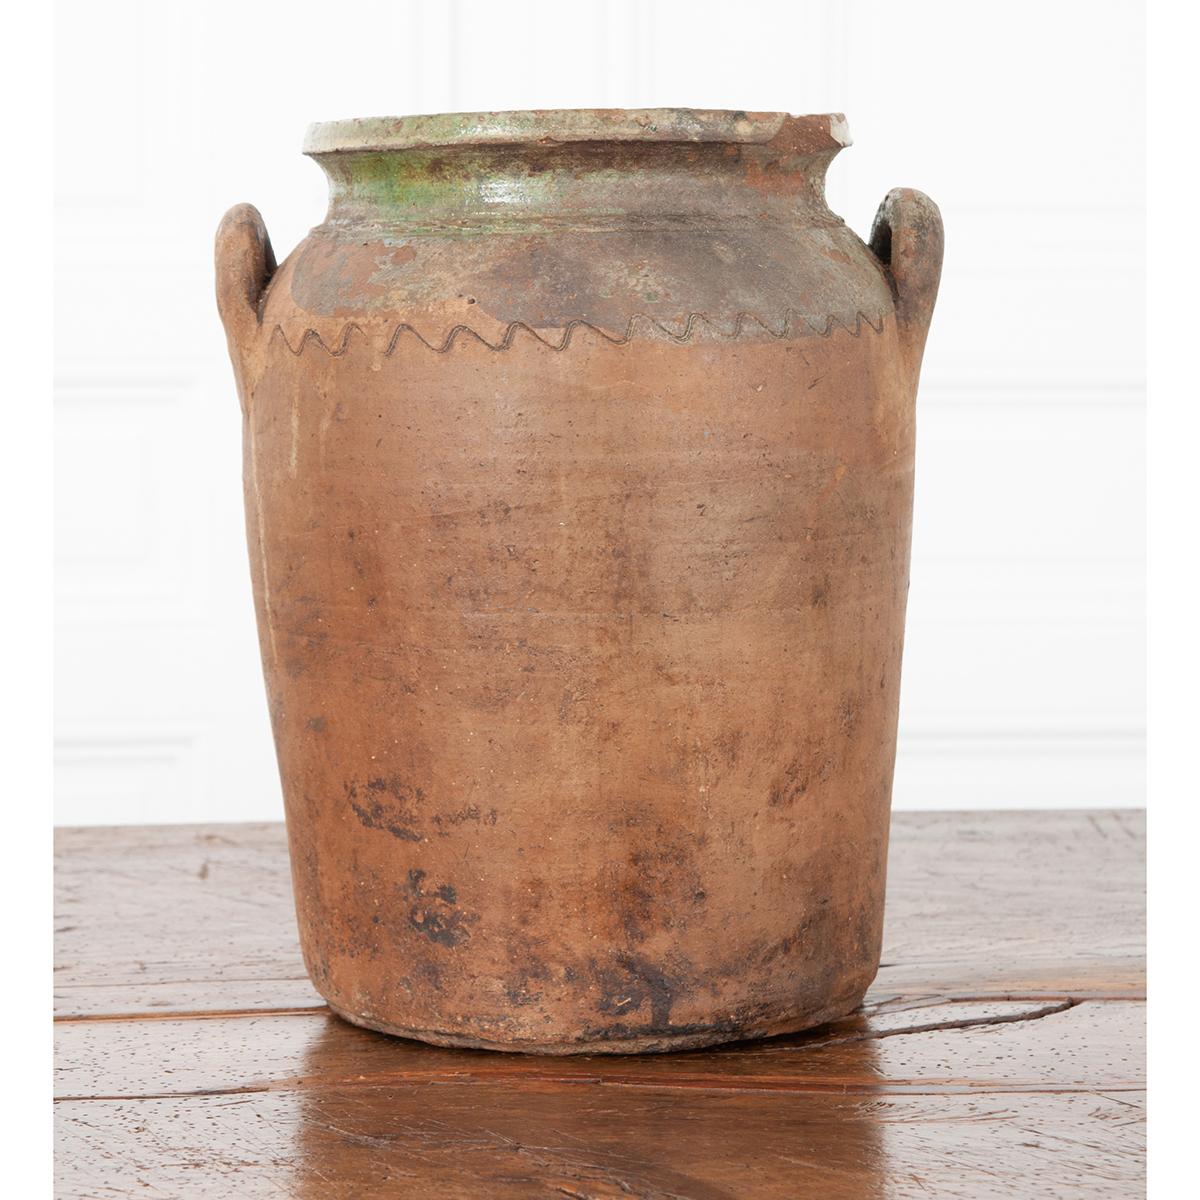 This wide-mouth terracotta vase is one of a kind. With a worn partial green glaze at the top and carved wavelike details, this storage jar will add the perfect provincial look to any indoor or outdoor space. Two handles on the side of the jar are